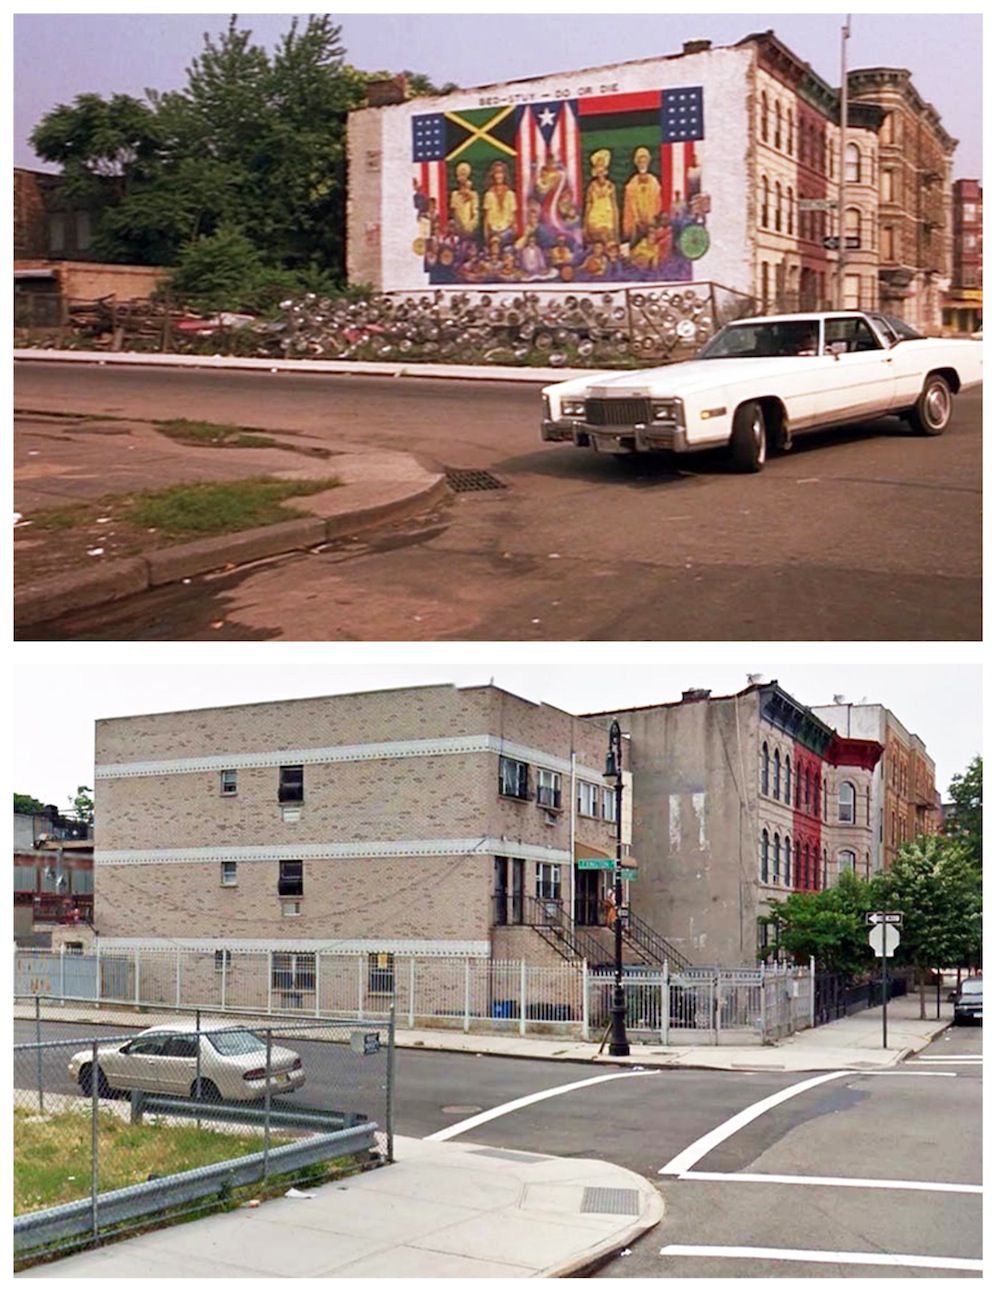 Do The Right Thing, 1988: Lexington Ave & Stuyvesant Ave, Brooklyn, NY 11221 (notice the last remains of mural on building)